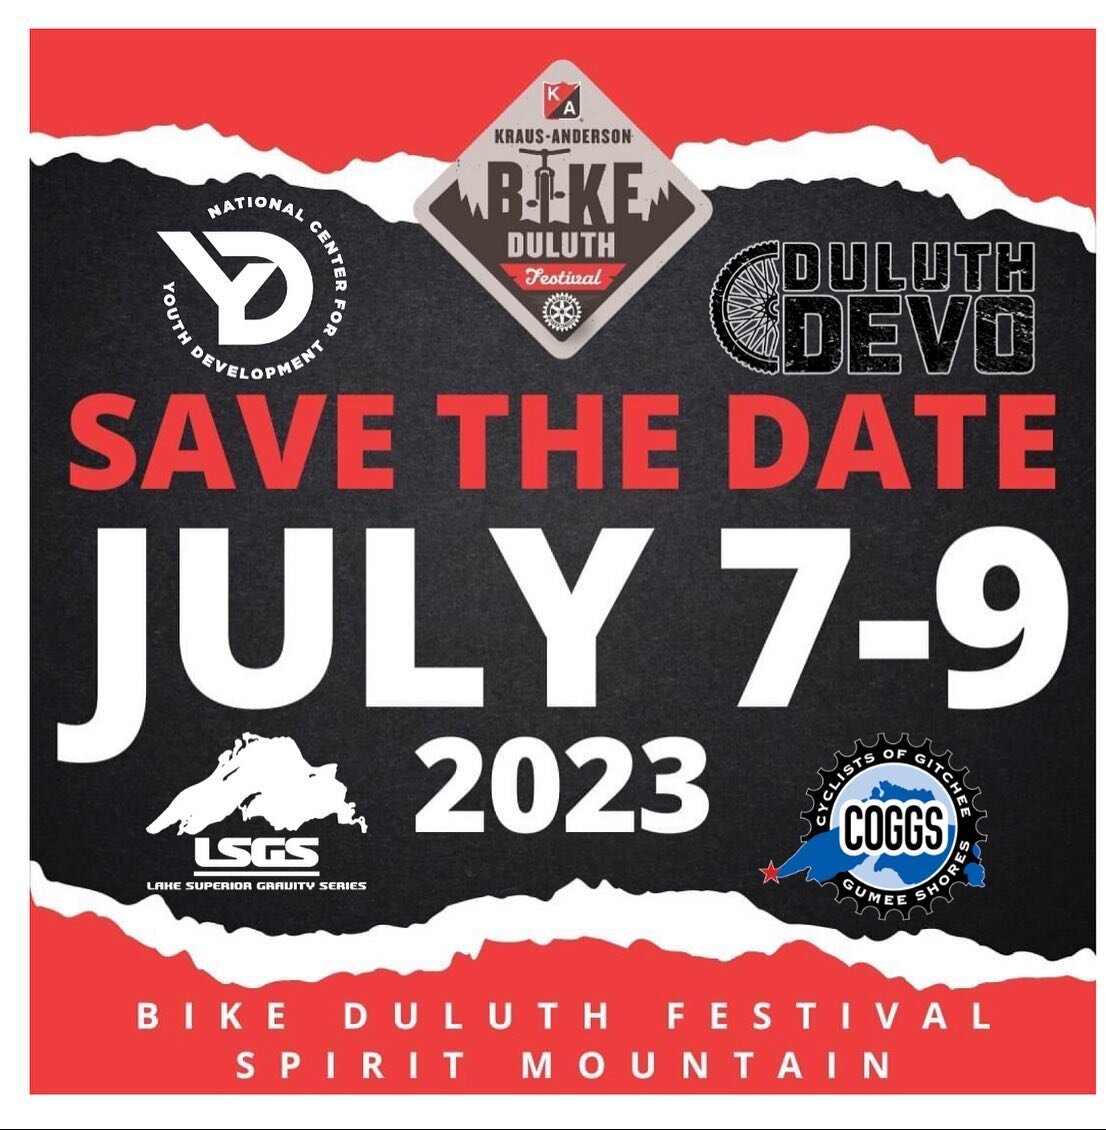 Plan for the entire holiday week&hellip;

&hellip;it&rsquo;s going to be a blast

Rides, camps, the 4th in glorious Duluth, pre-rides, STXC, chainless race, USAC Sanctioned XC, two days of enduro, festival, families, community, and BIKES!

SO much mo